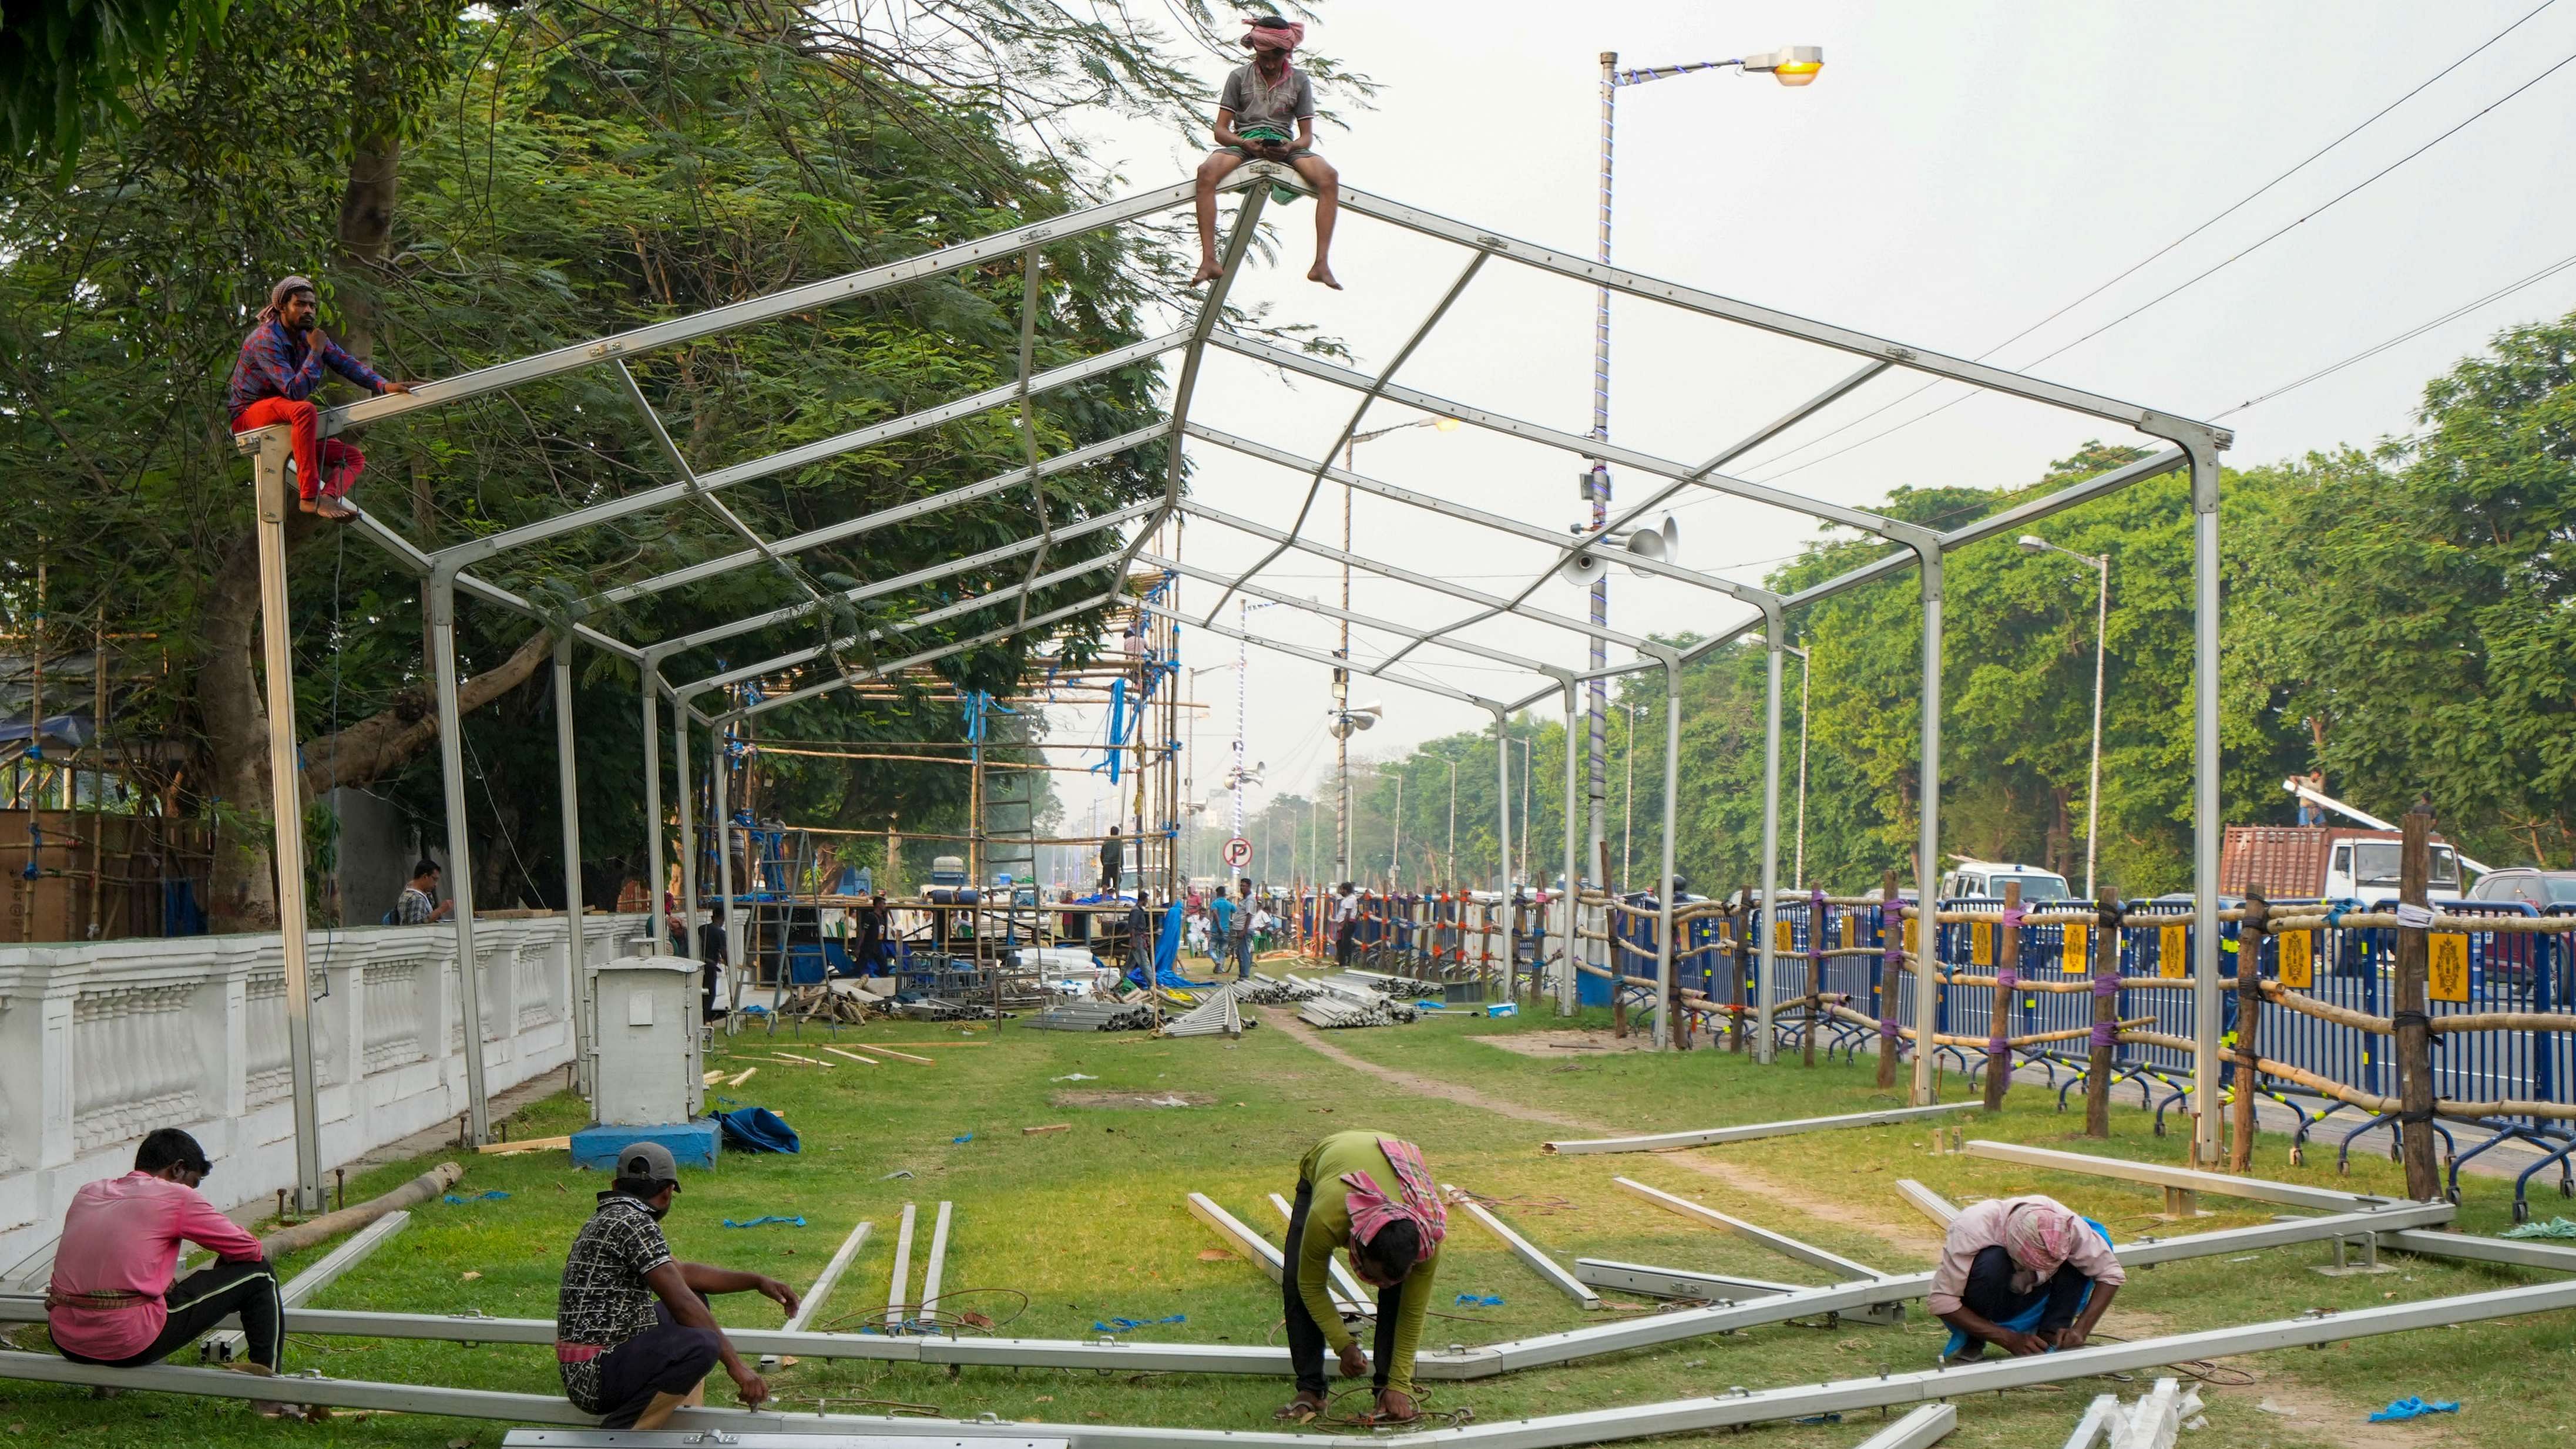 Workers prepare 'Dharna Manch' ahead of the West Bengal Chief Minister Mamata Banerjee's sit-in demonstration against the central government, in Kolkata. Credit: PTI Photo